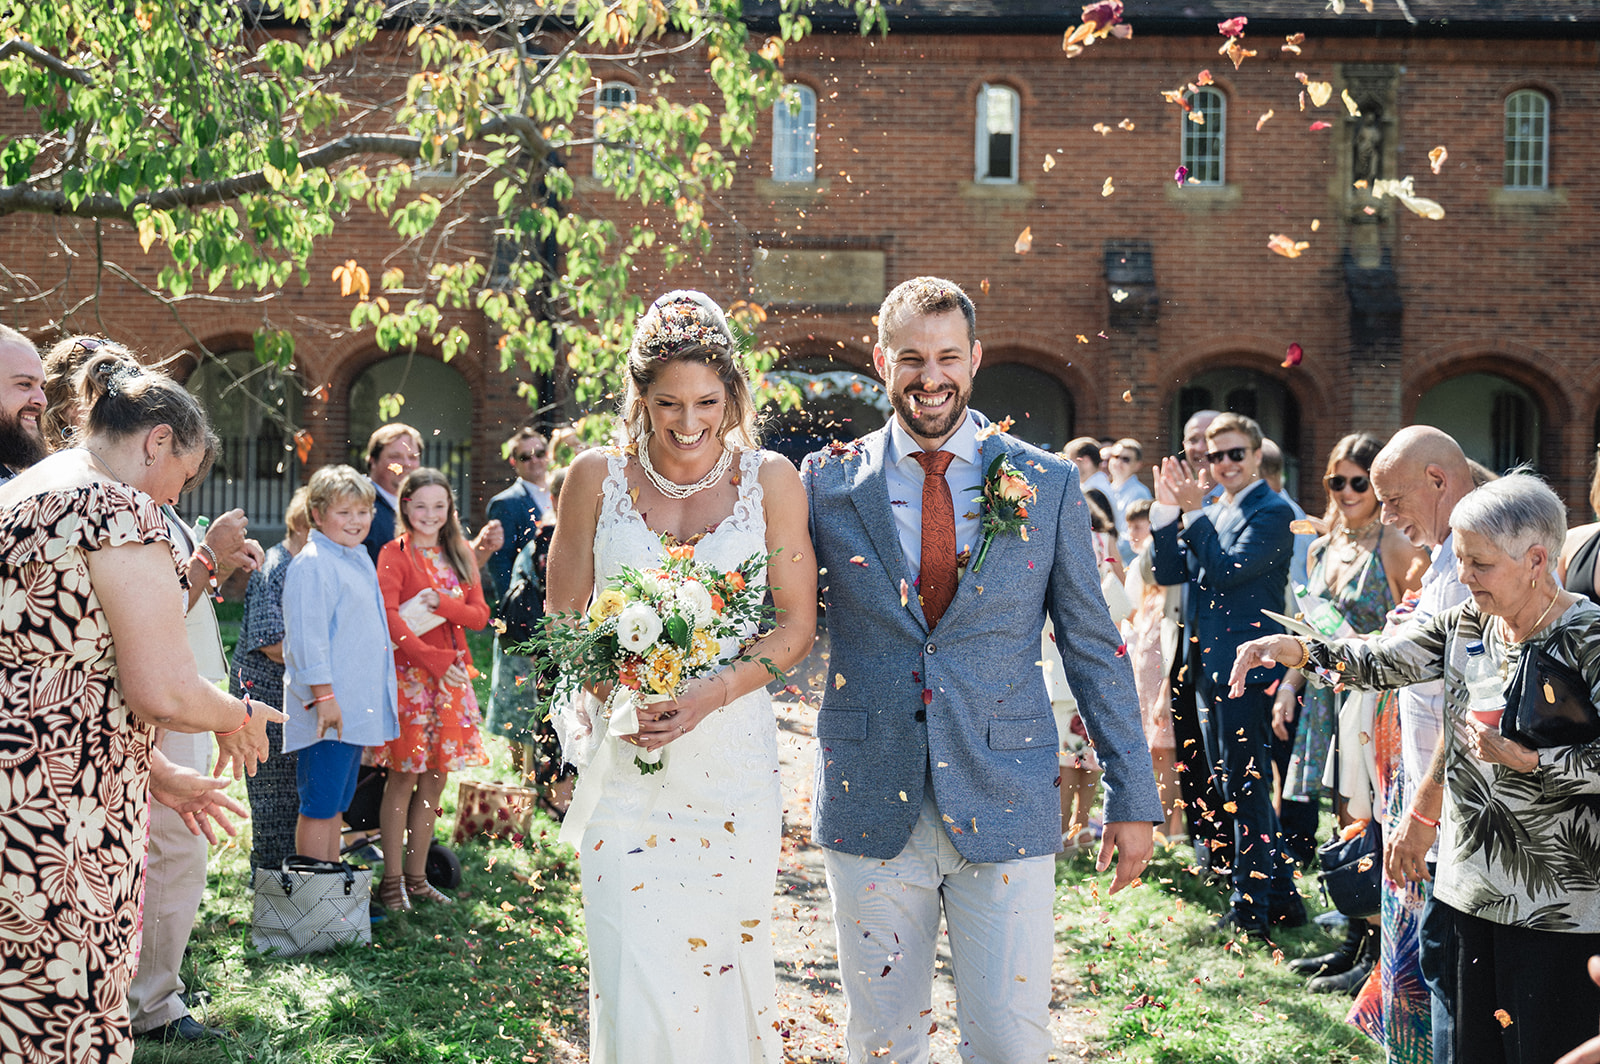 Natalie and George welcomed with confetti toss at Ashburton Hall